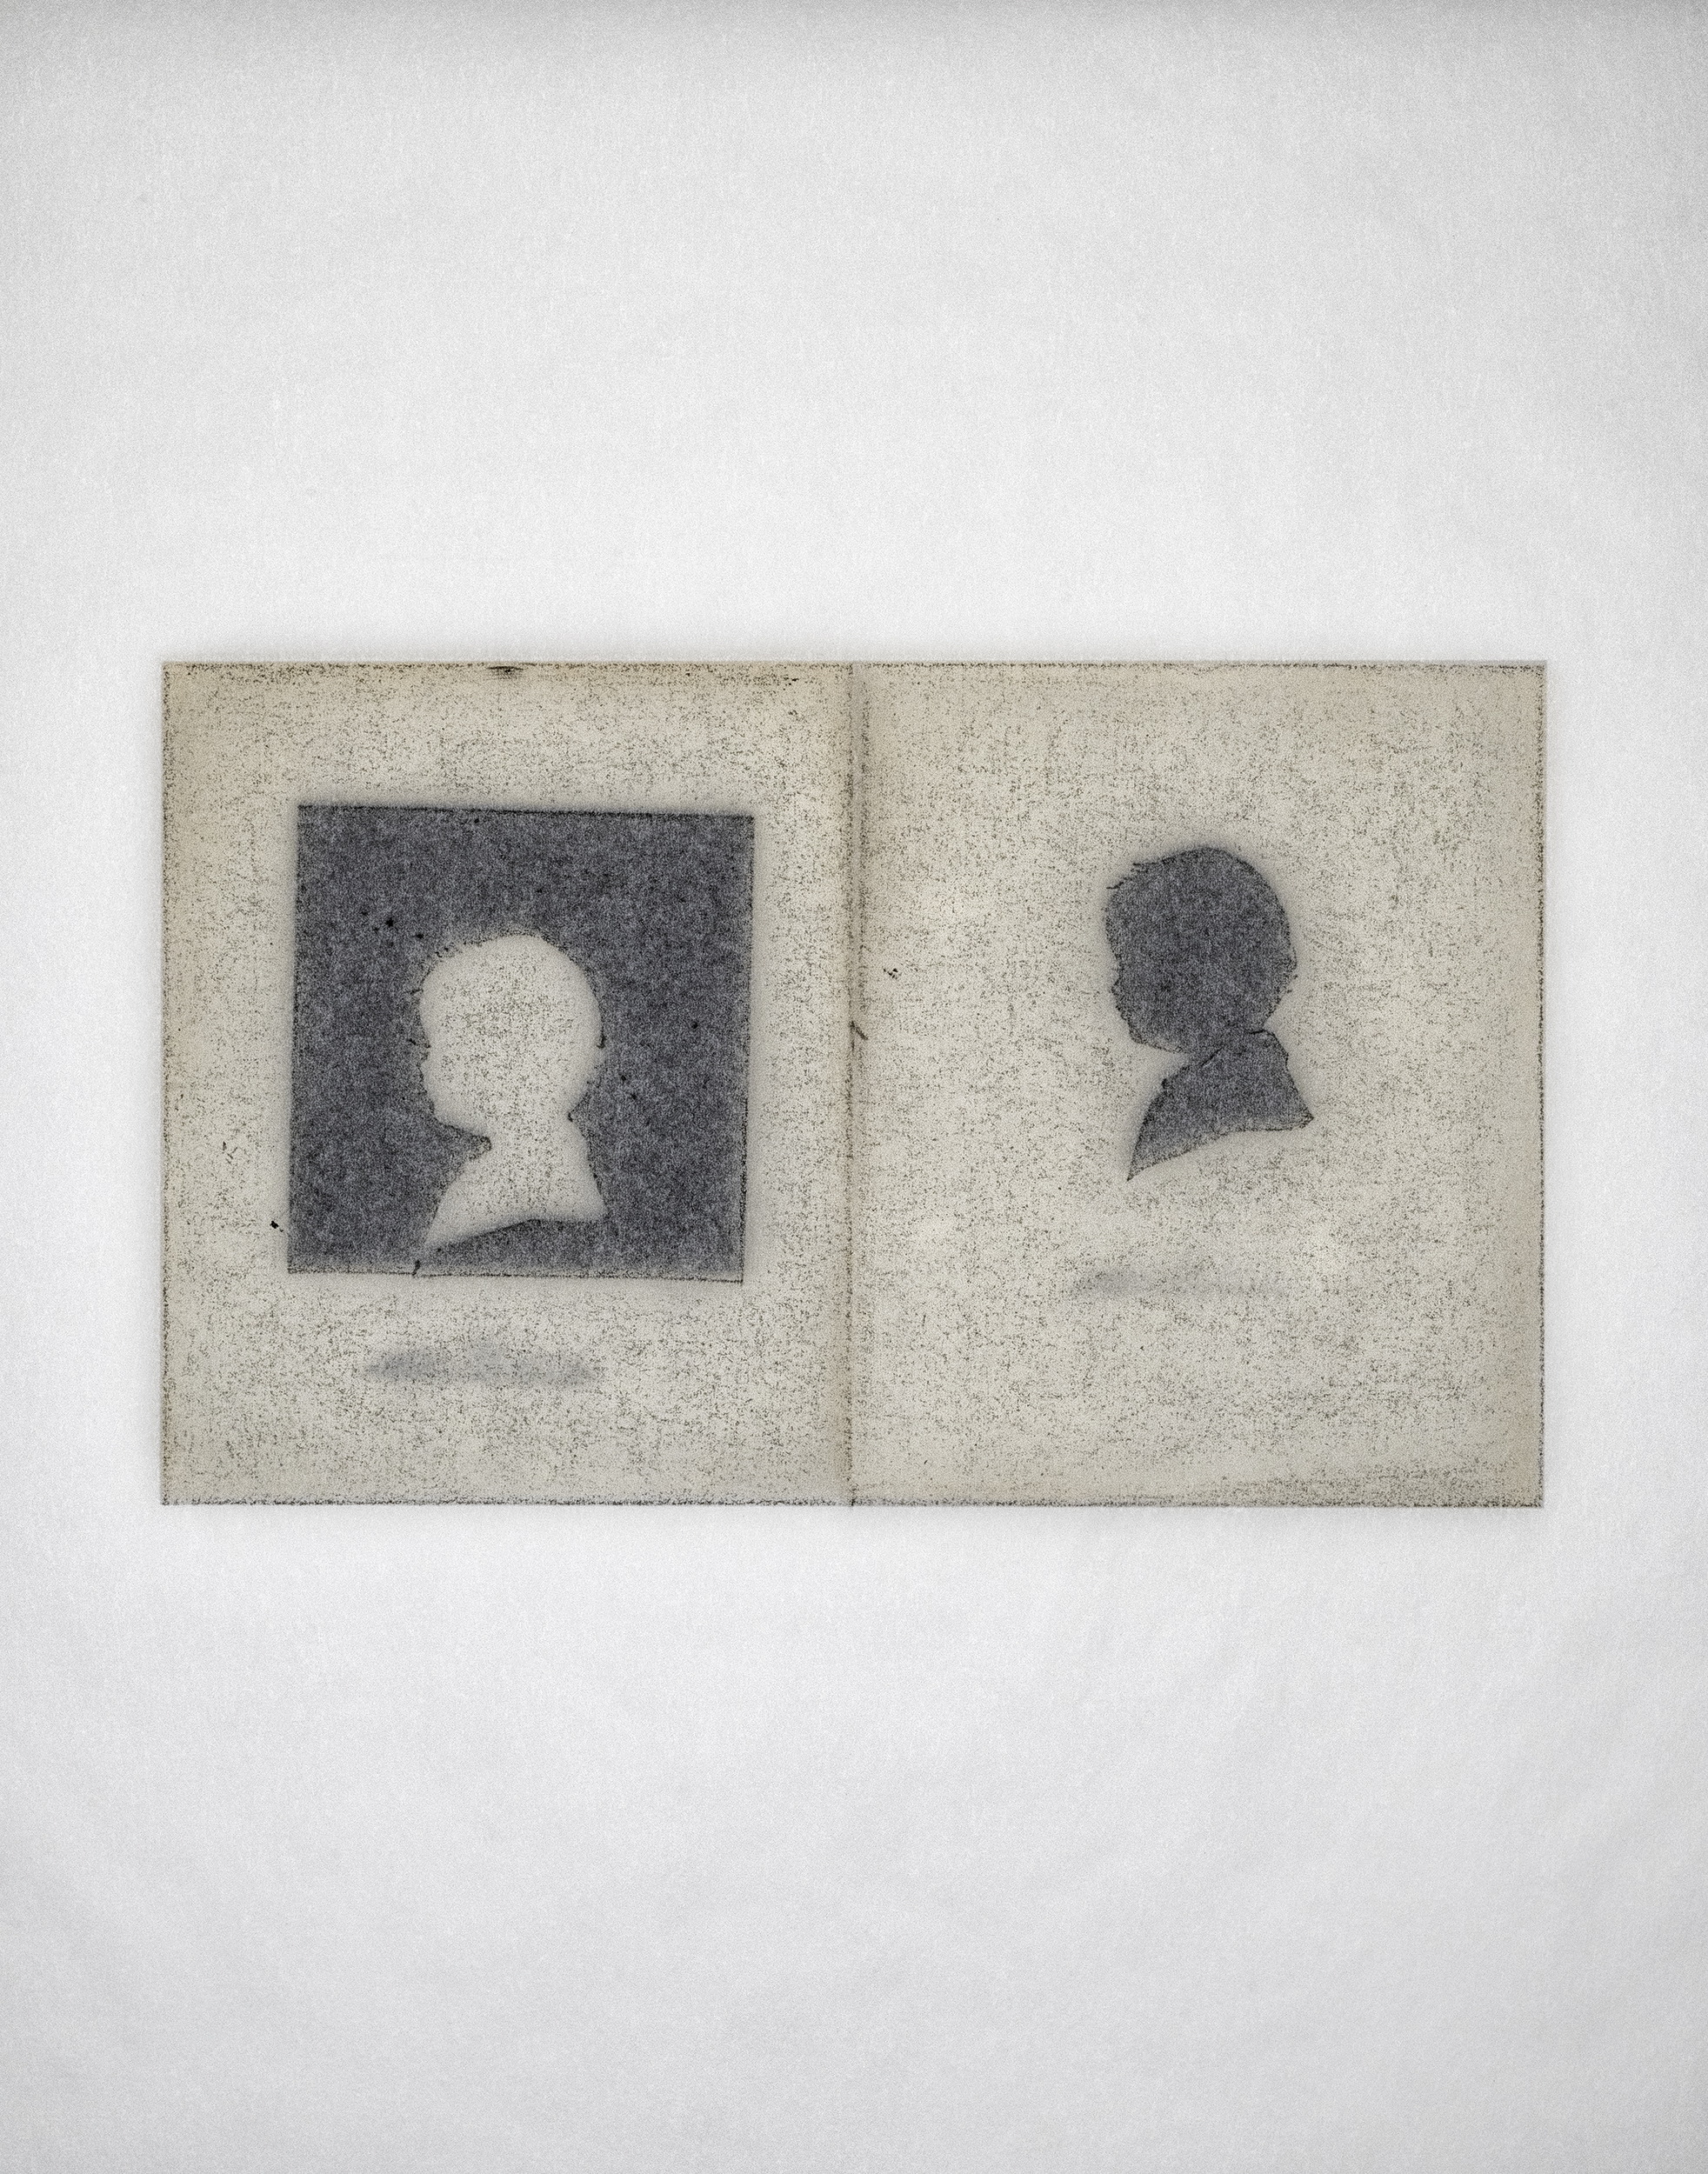 Cut Paper Silhouette (Child by Pierre Bottemer), Mid 18th Century – Mid 19th Century